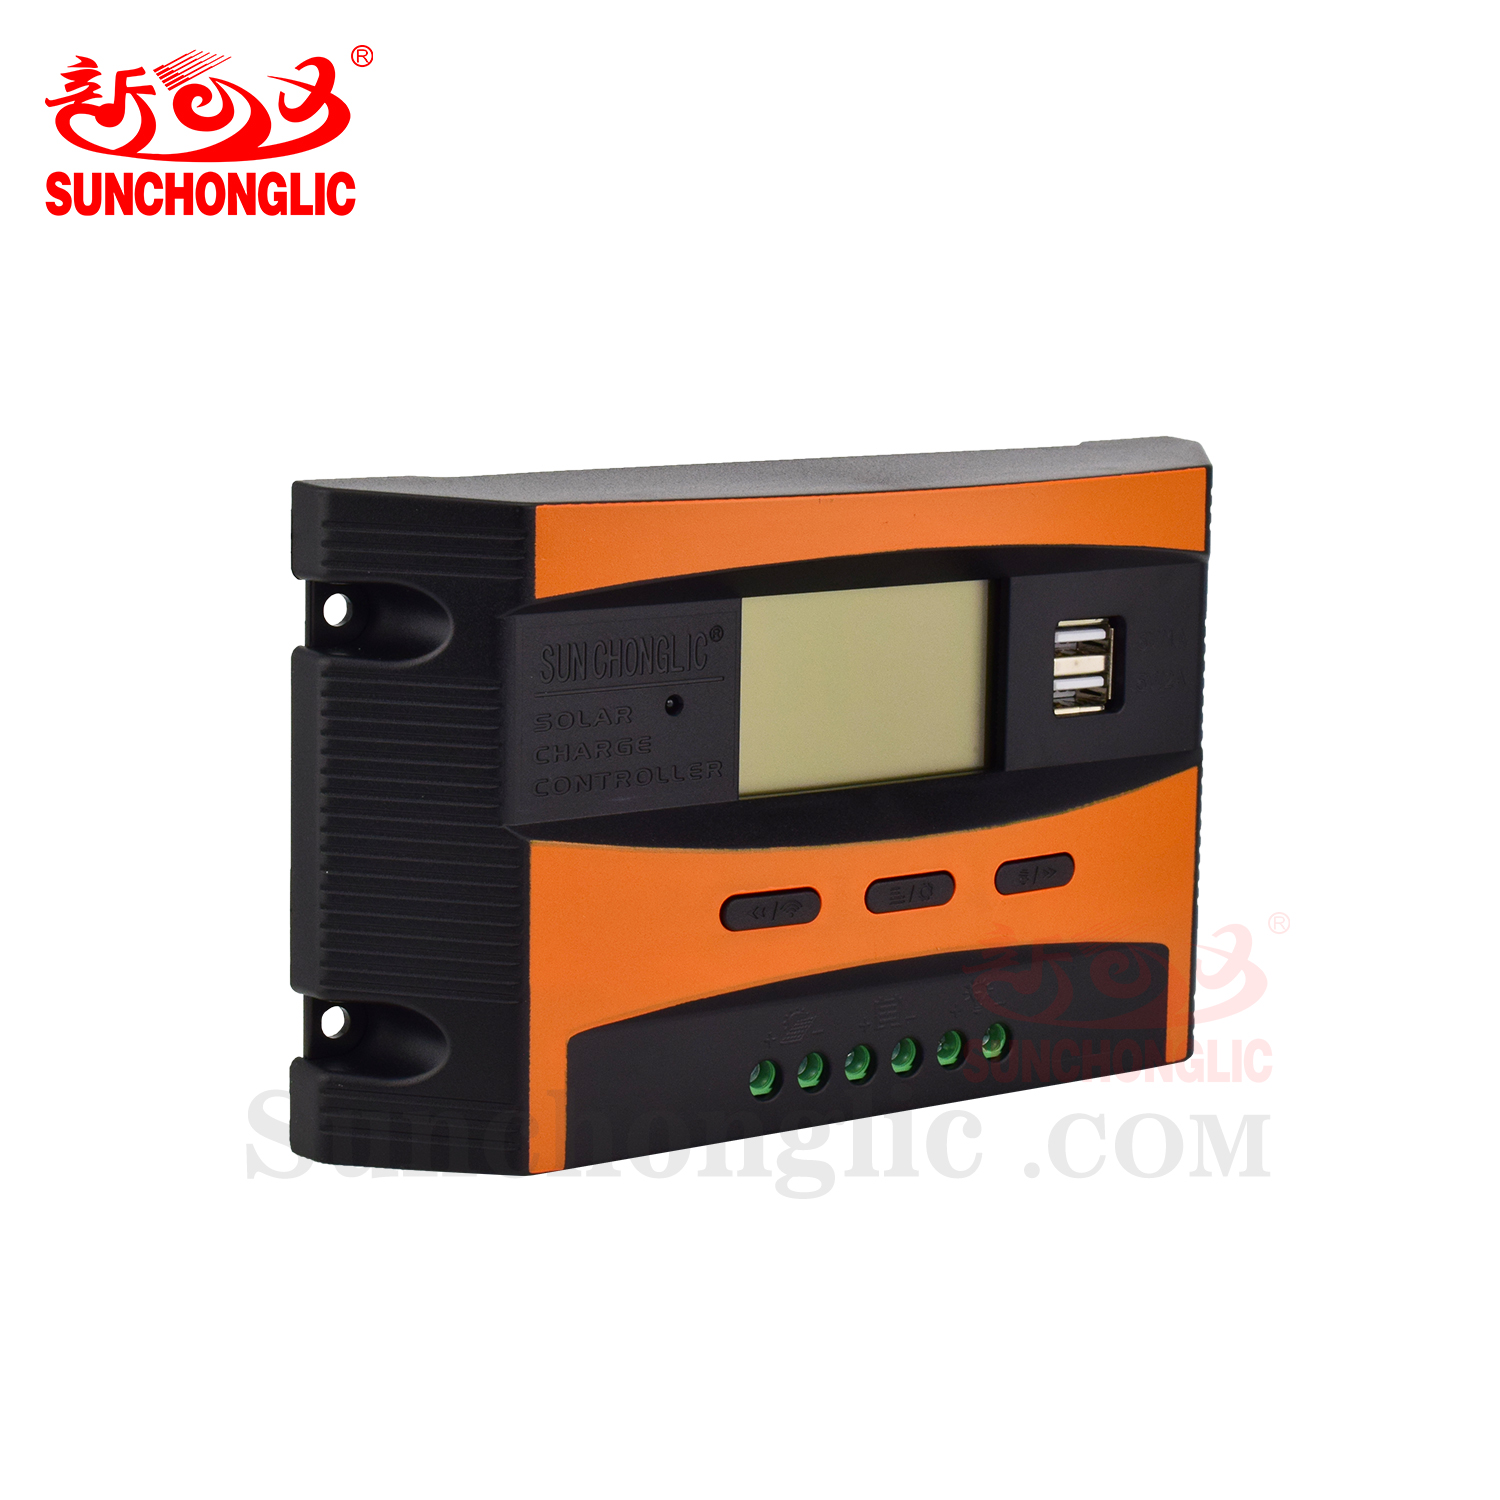 Solar Charge Controller - FT-C1210